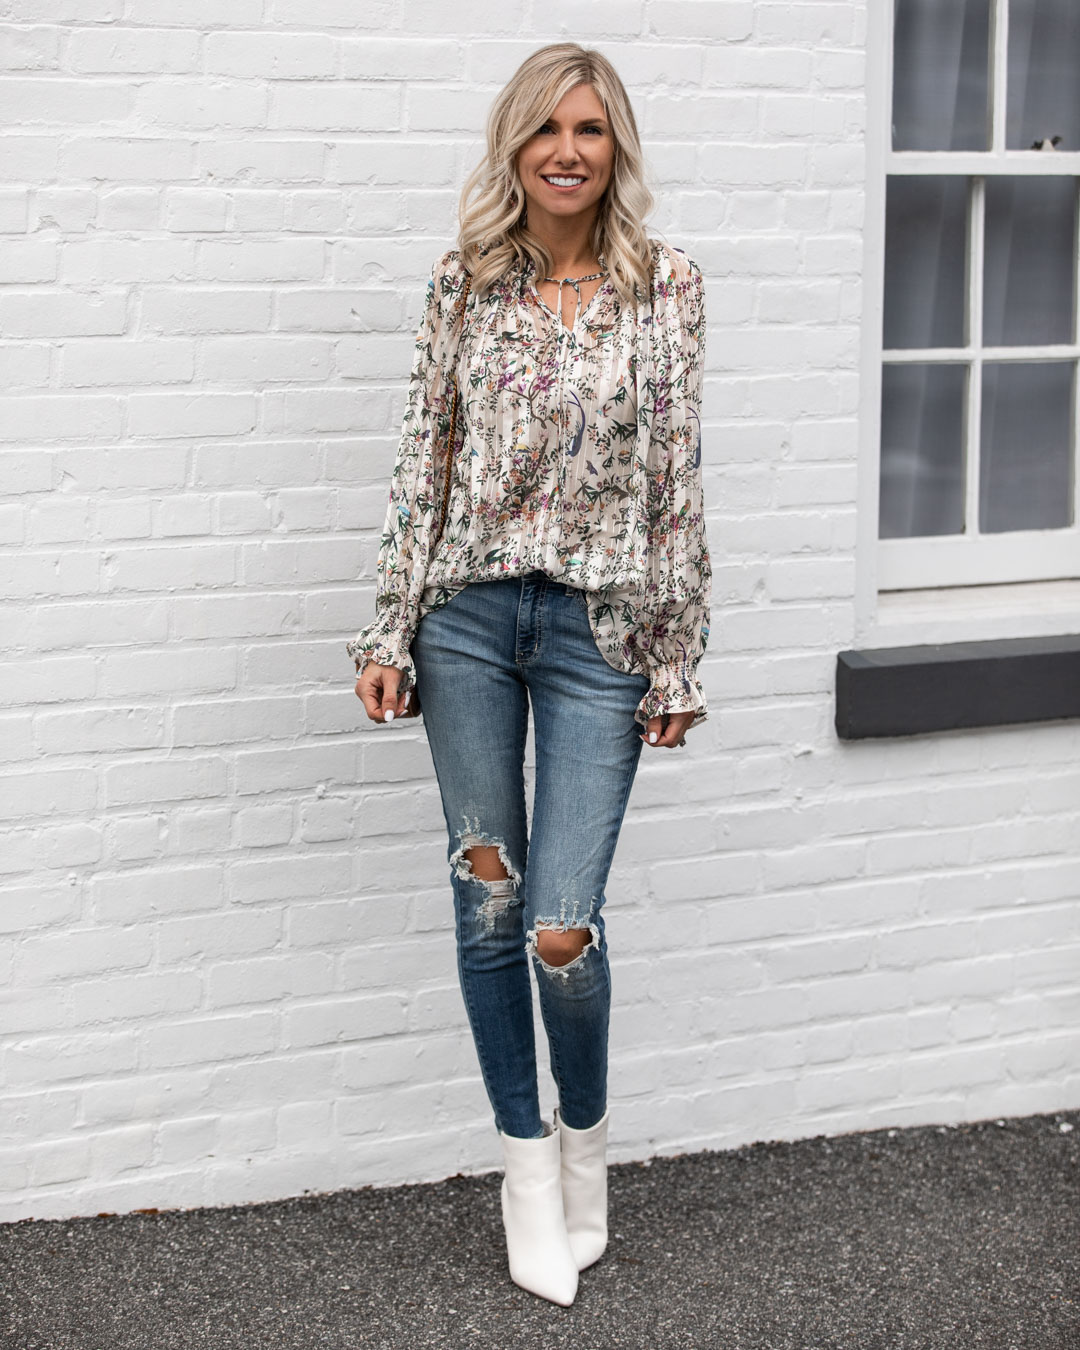 Floral Top for Spring